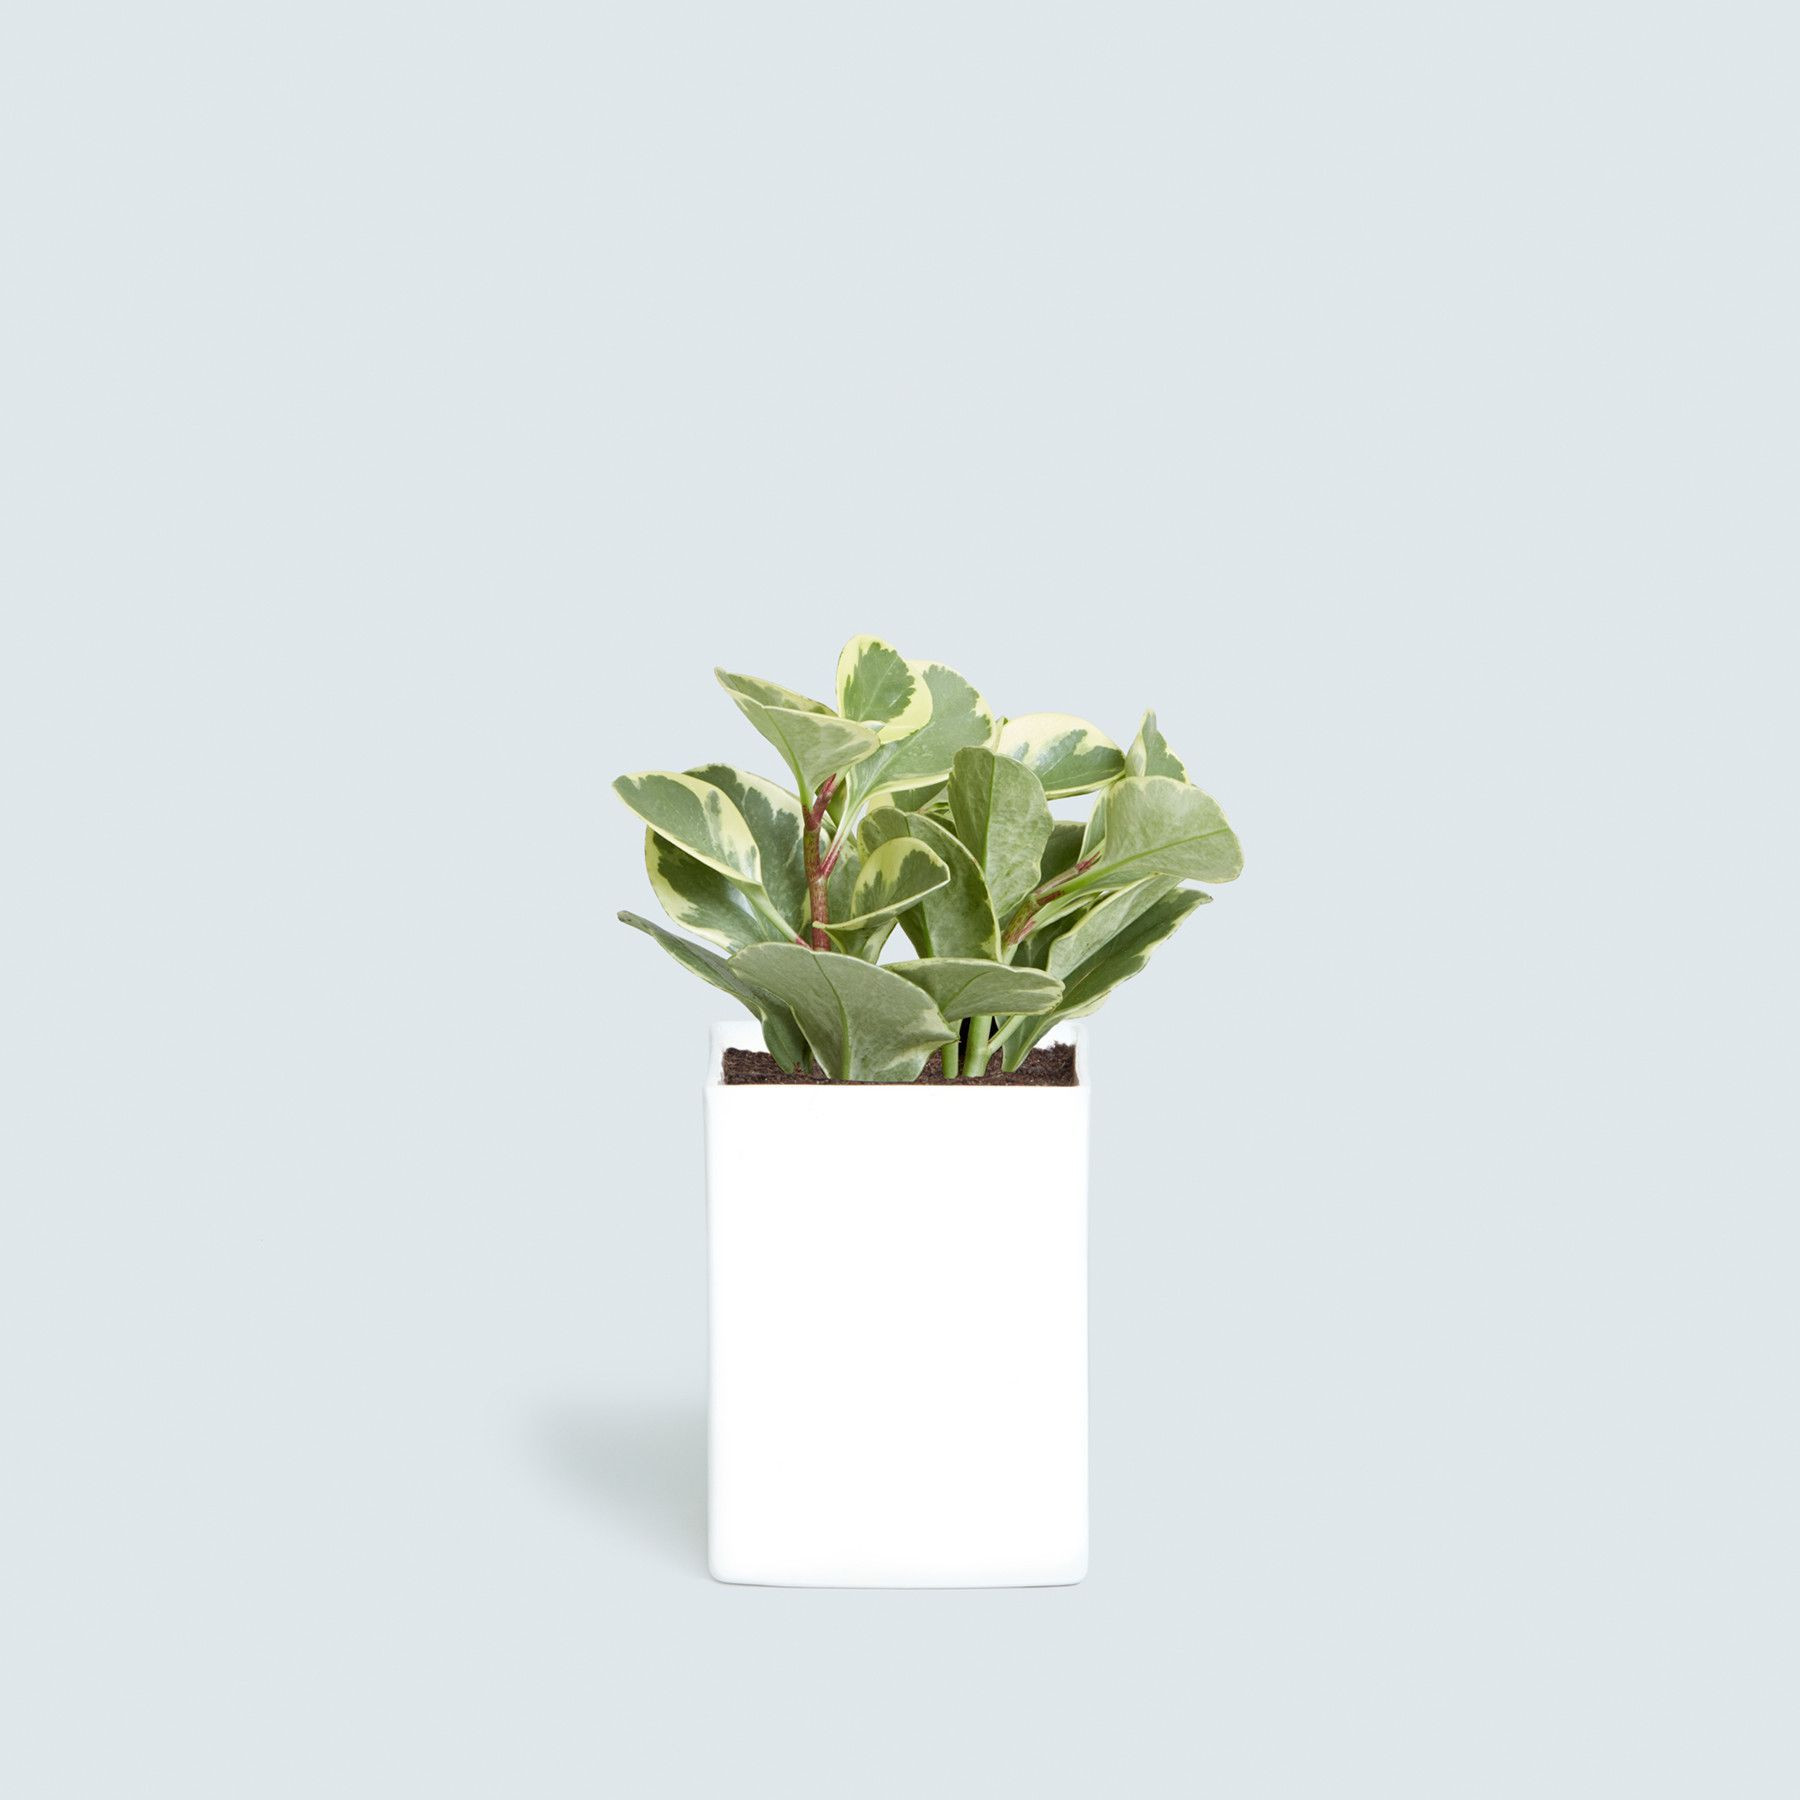 19 Wonderful Stainless Steel Bud Vase 2024 free download stainless steel bud vase of cityscape bud vase 2 openings throughout peperomia green olmsted planter